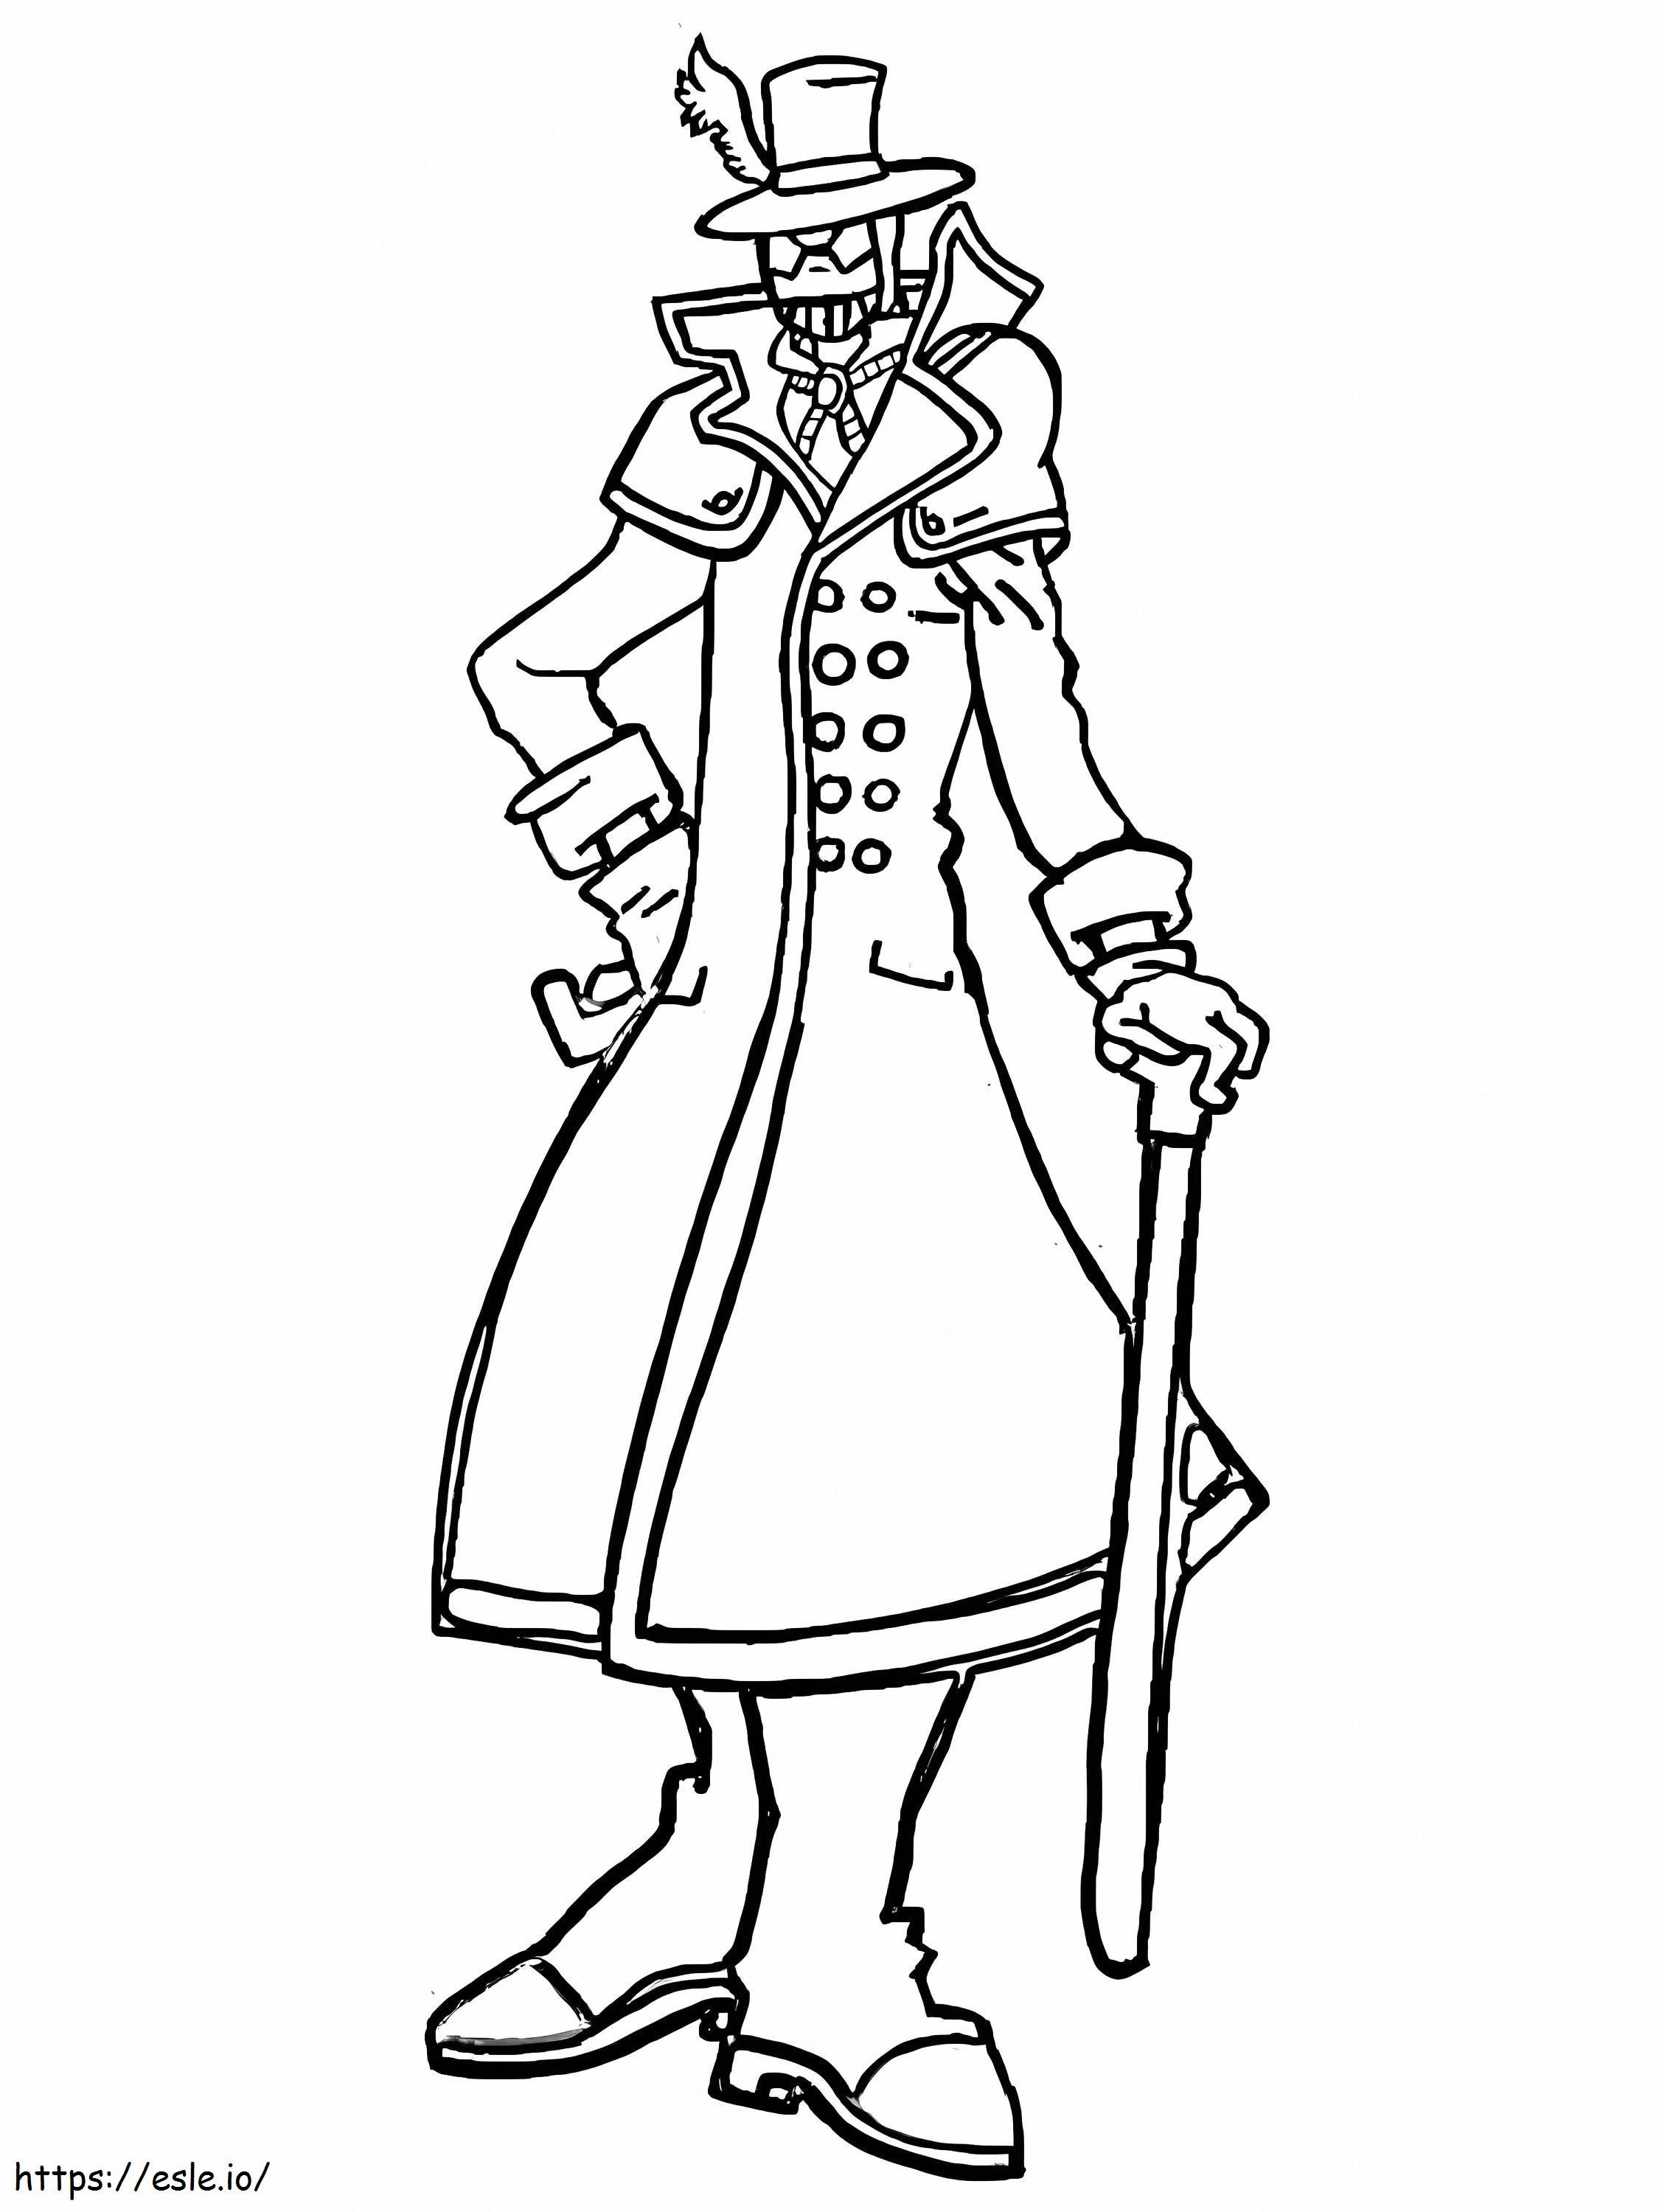 Print Mr. Compress coloring page